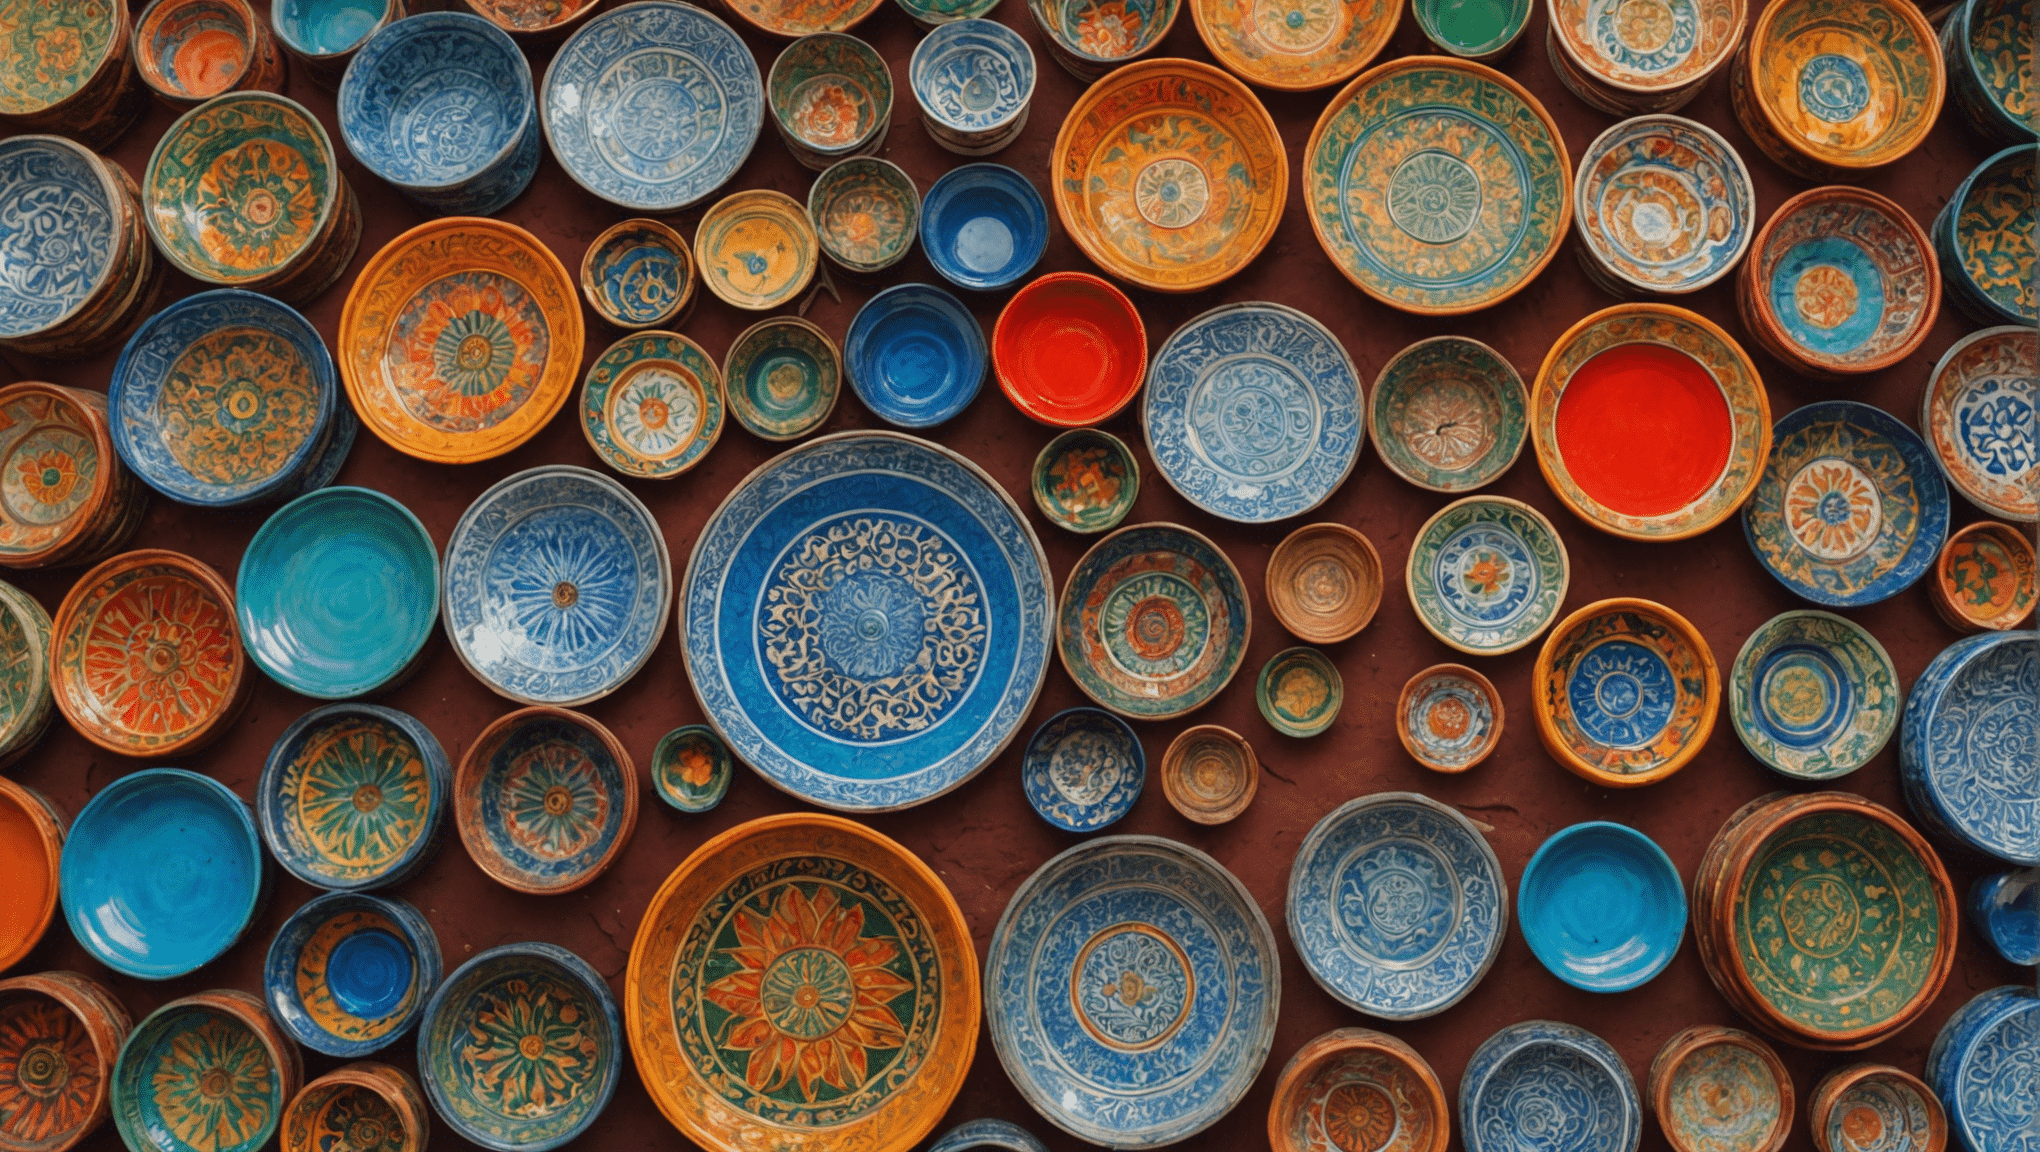 explore the mellah of marrakesh, a captivating and hidden gem in morocco waiting to be discovered. get lost in its rich history and vibrant culture, and uncover the secrets of this extraordinary part of morocco.